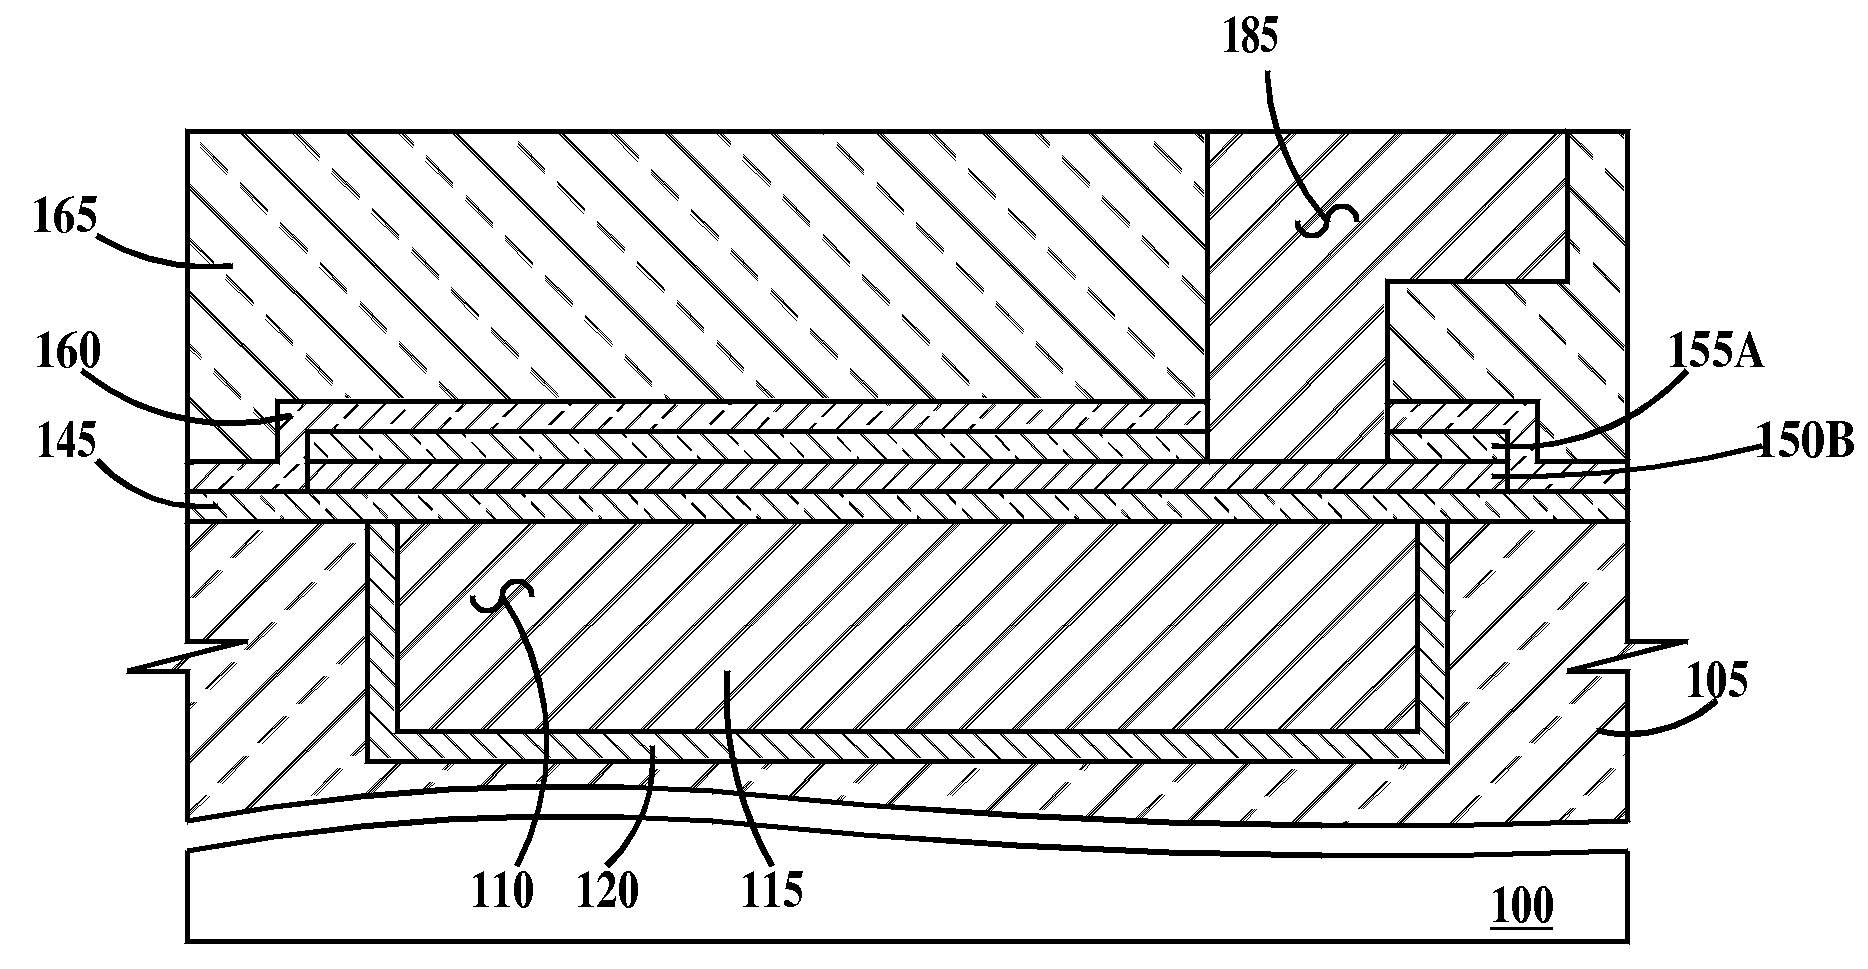 Method of forming a metal silicide layer, devices incorporating metal silicide layers and design structures for the devices